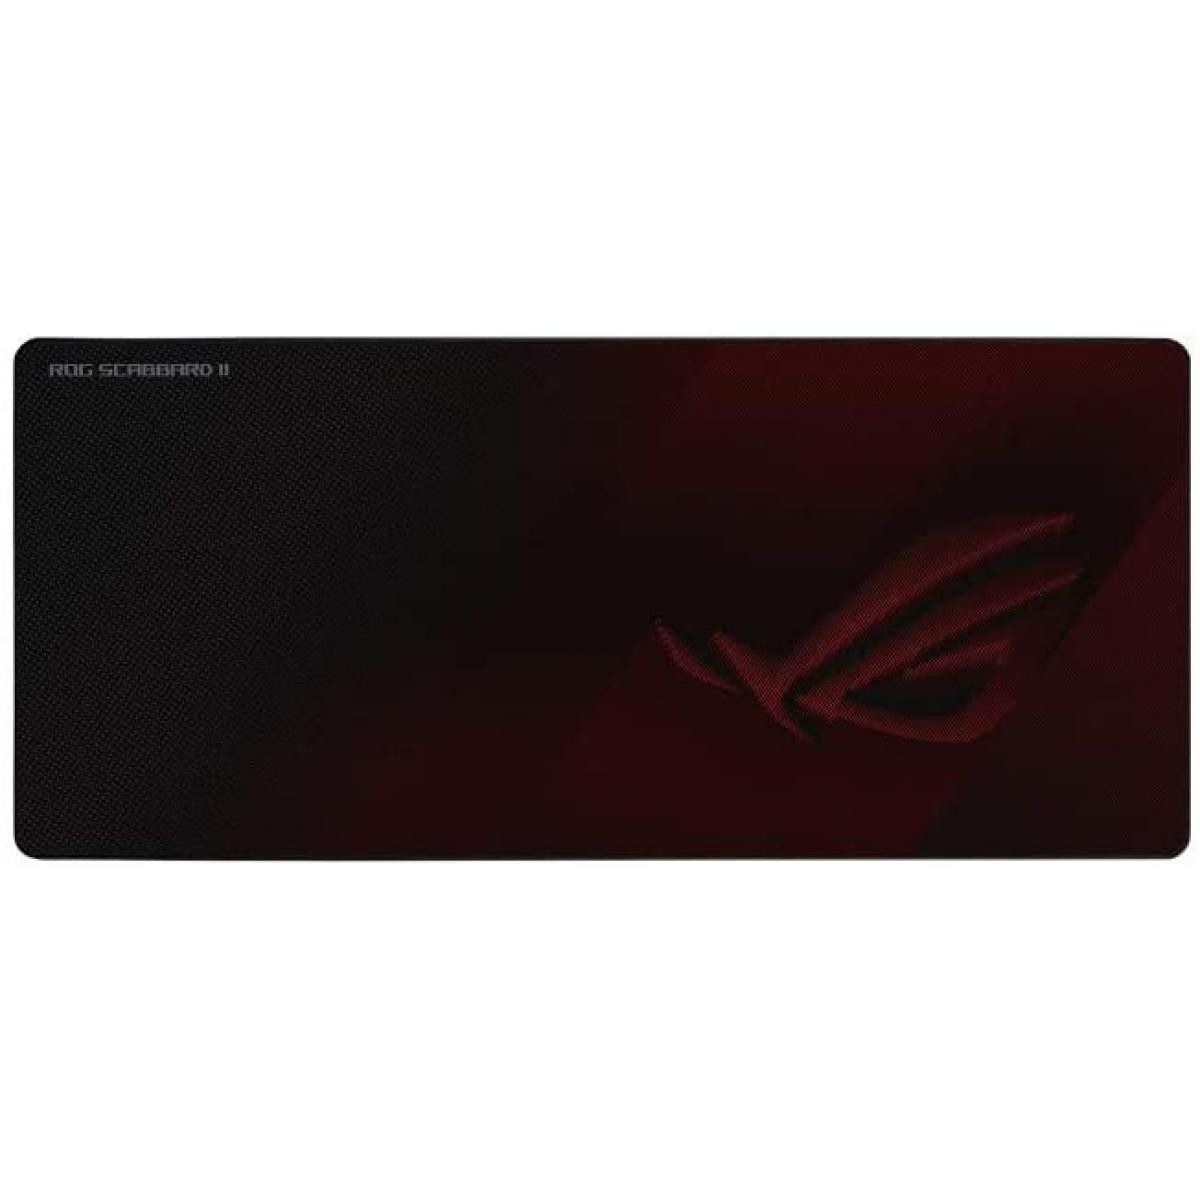 Asus - ASUS ROG Scabbard II Mouse Pad ROG Scabbard II Mouse Pad - Tapis de souris